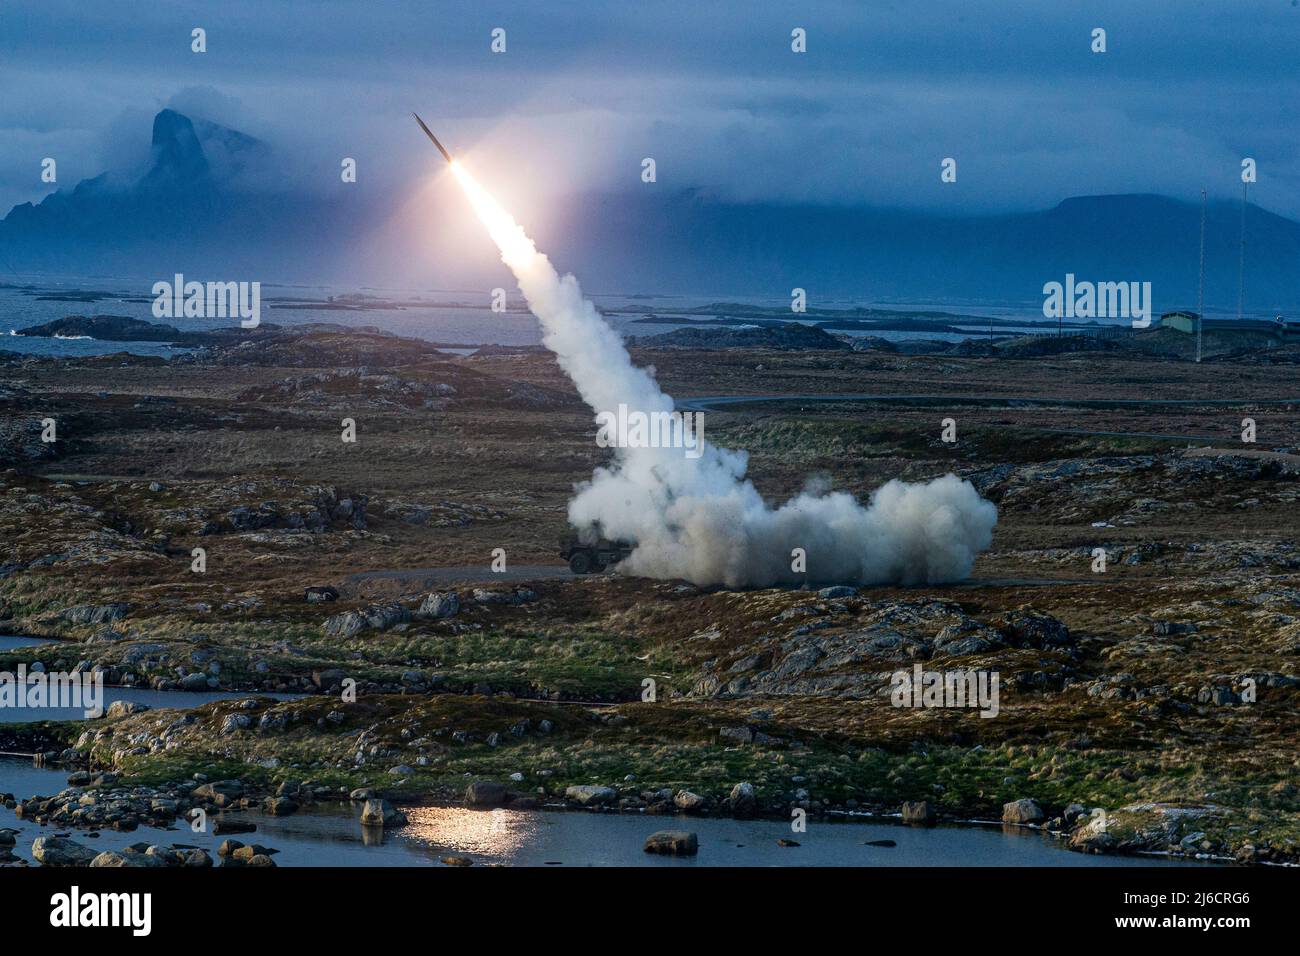 Andoya, Norway. 31 May, 2021. A U.S. Marines Corps M142 High-Mobility Artillery Rocket System known as a HIMARS takes part in a live fire launch during exercise Formidable Shield, May 31, 2021 in Andoya, Norway. Credit: LCpl. Nicholas Guevara/US Marines Photo/Alamy Live News Stock Photo